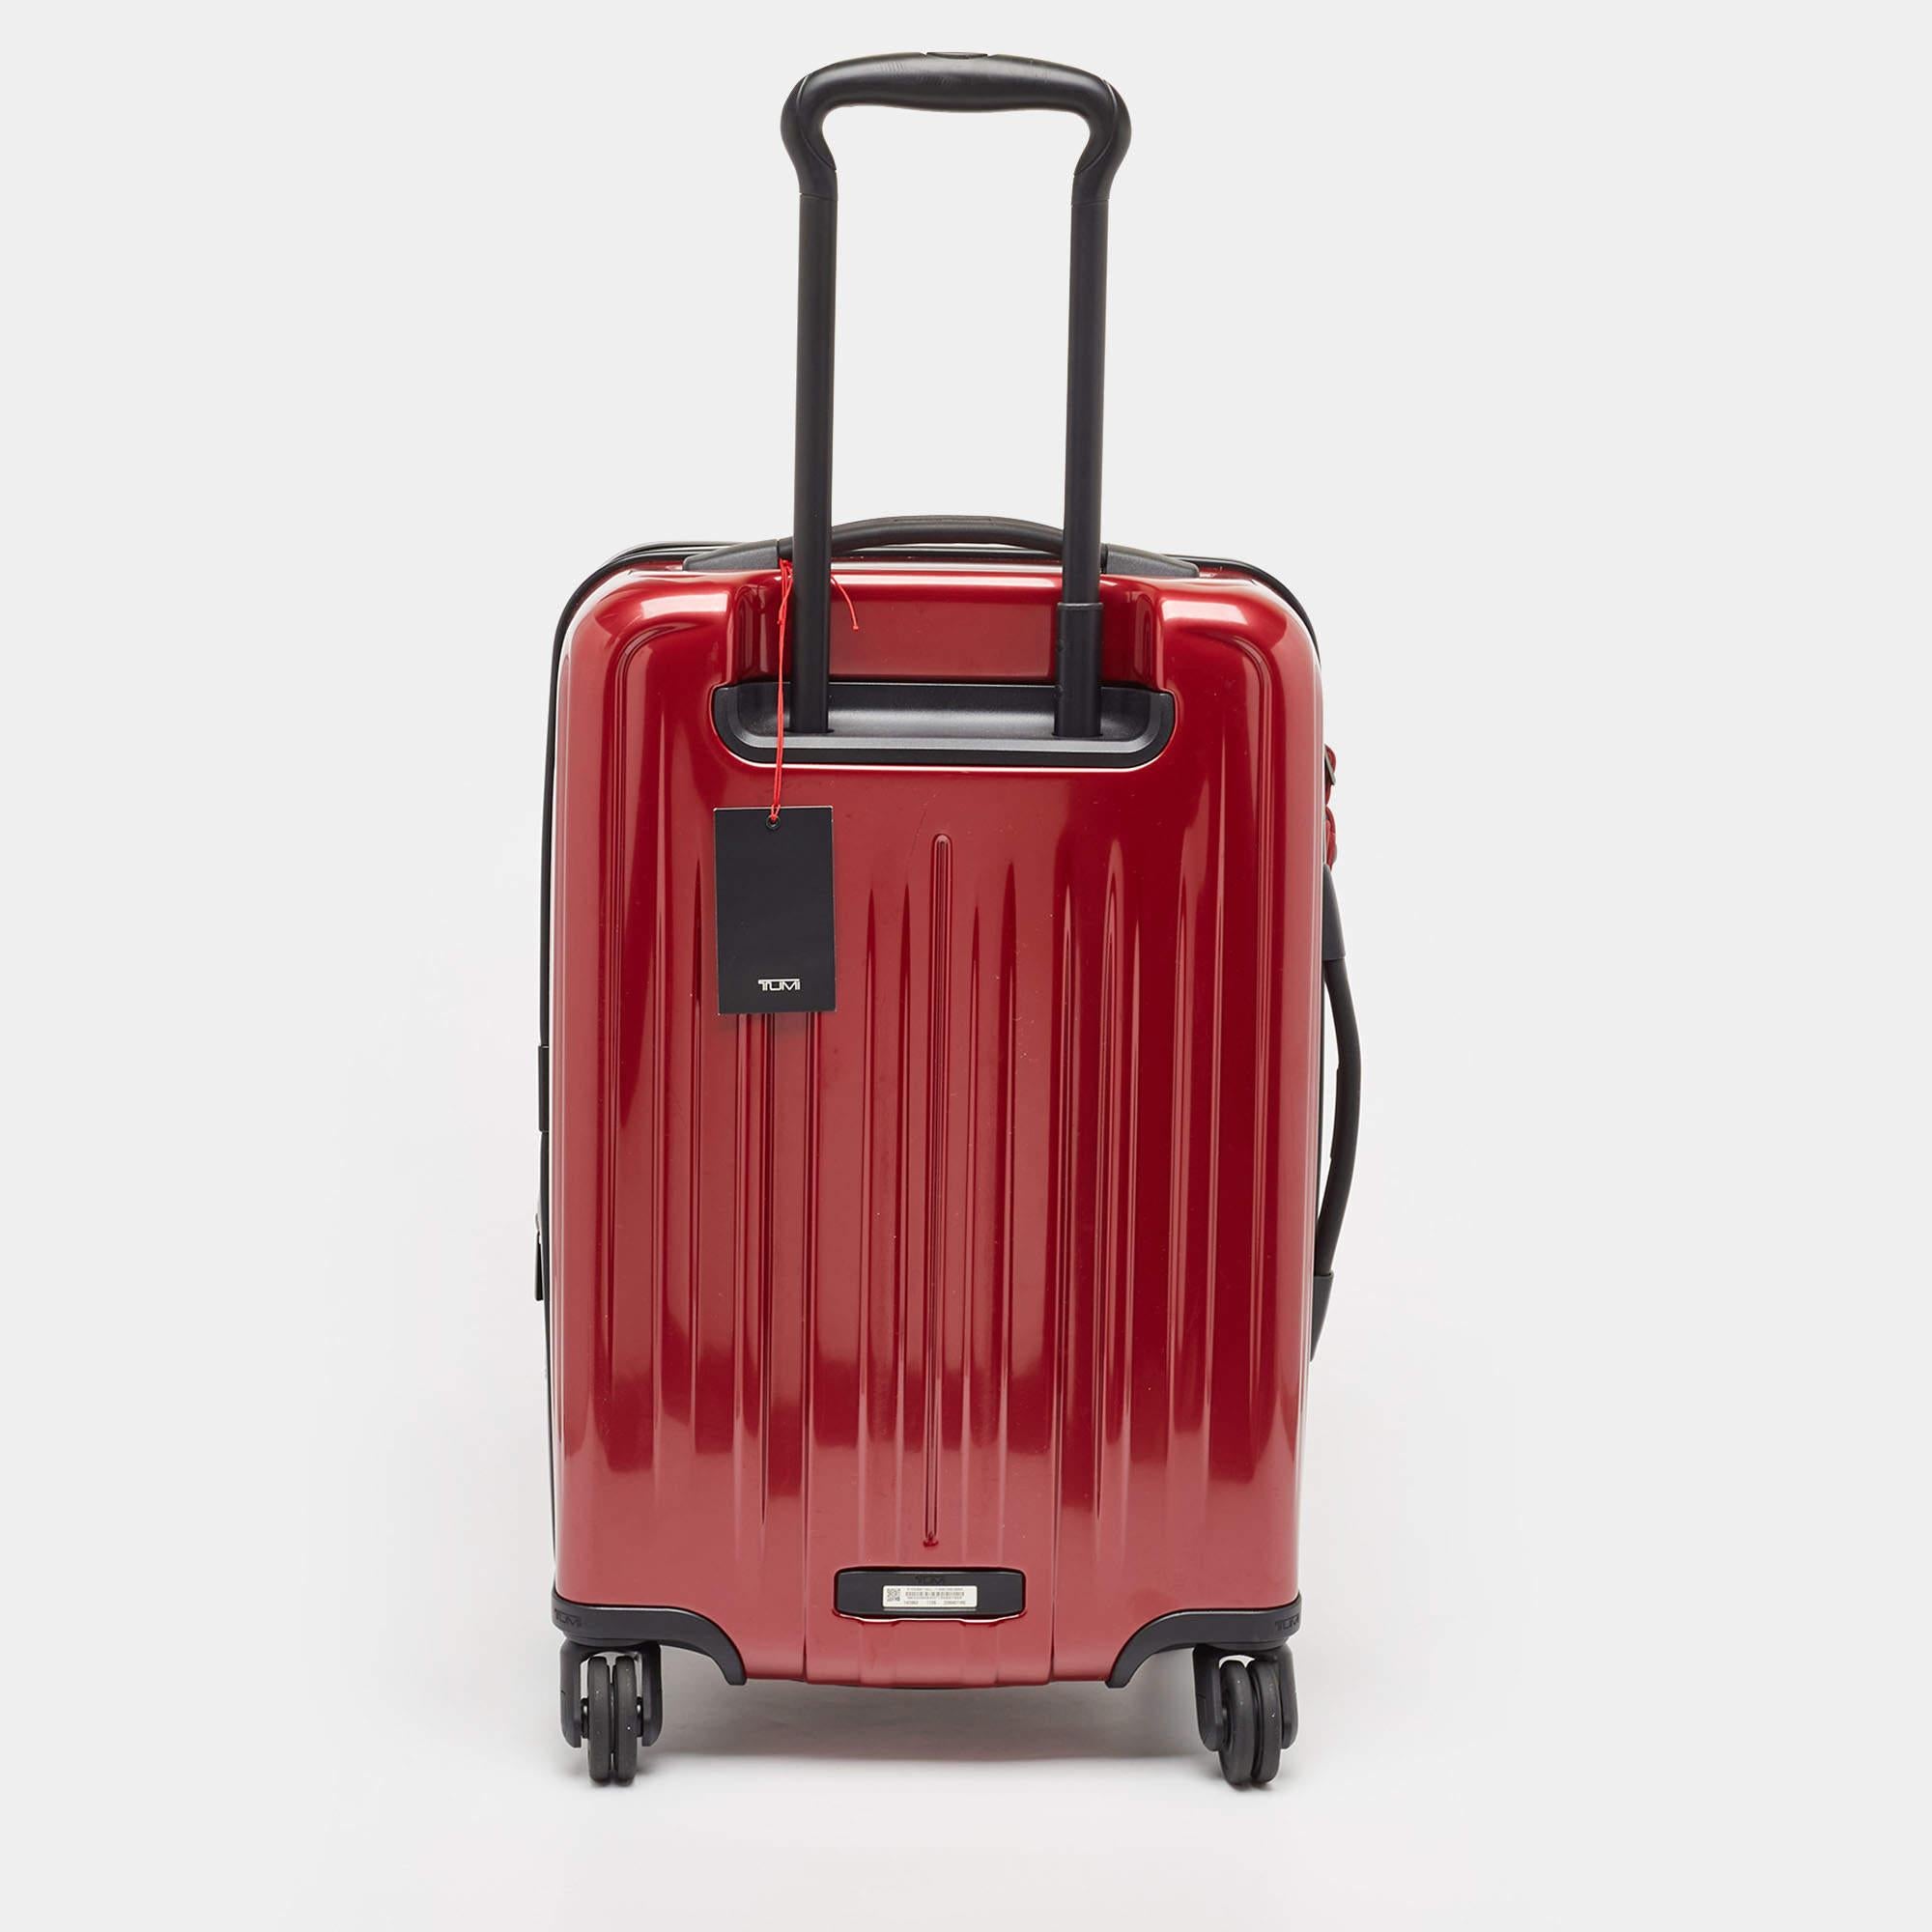 This luggage case from the house of TUMI is an accessory you will turn to when you have travel plans. It has been crafted using the best kind of materials to be appealing as well as durable. It's a worthy investment.

Includes: Leather Name Tag,